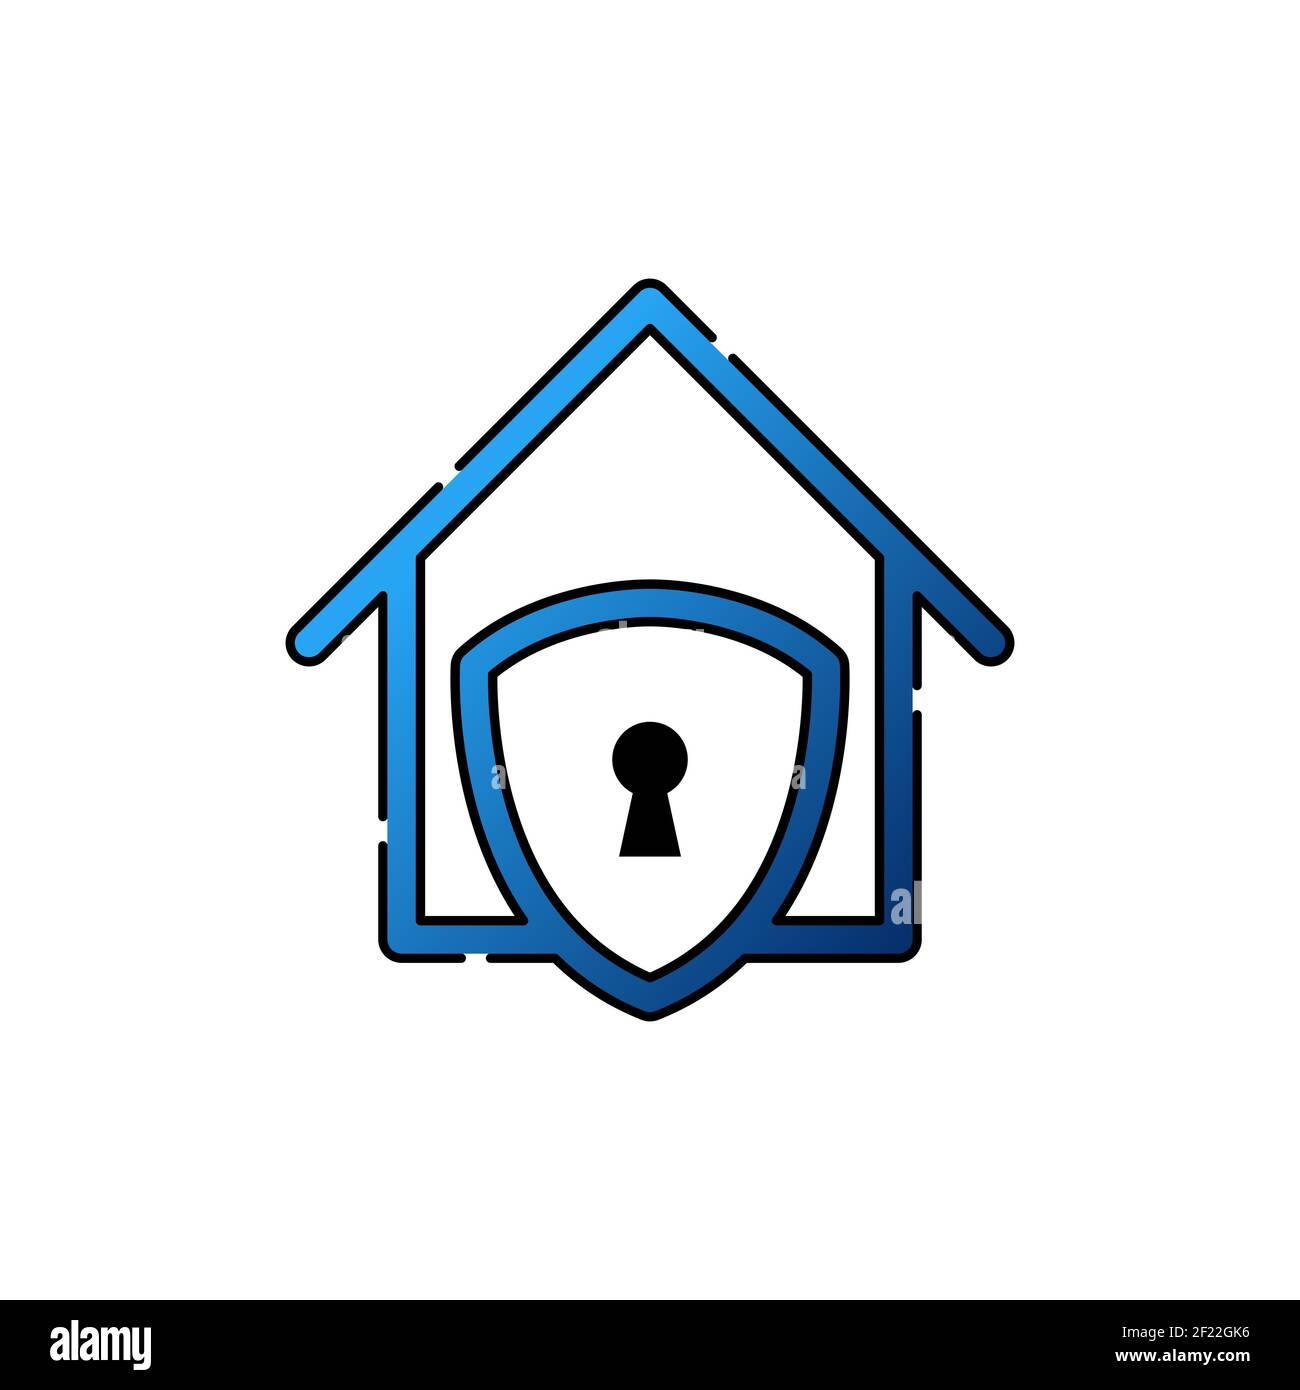 Home Security Logo Icon vector design illustration. Home Security with Shield Logo icon design concept for House and Real Estate. Smart House Secure d Stock Vector